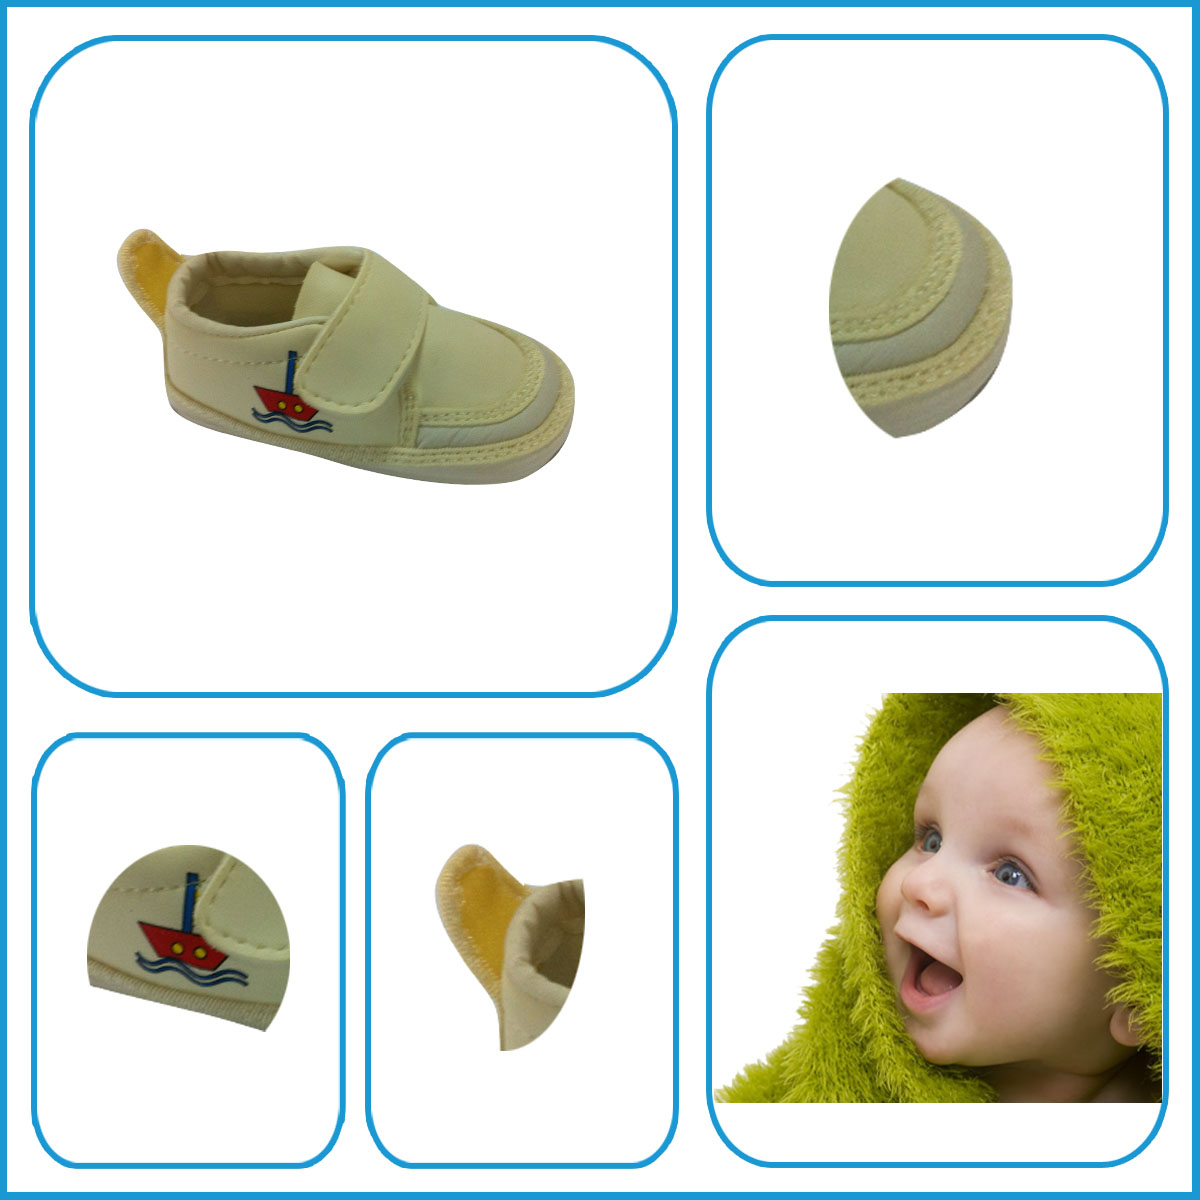 high quality baby shoes, comfortable infant shoes, baby toddler shoes